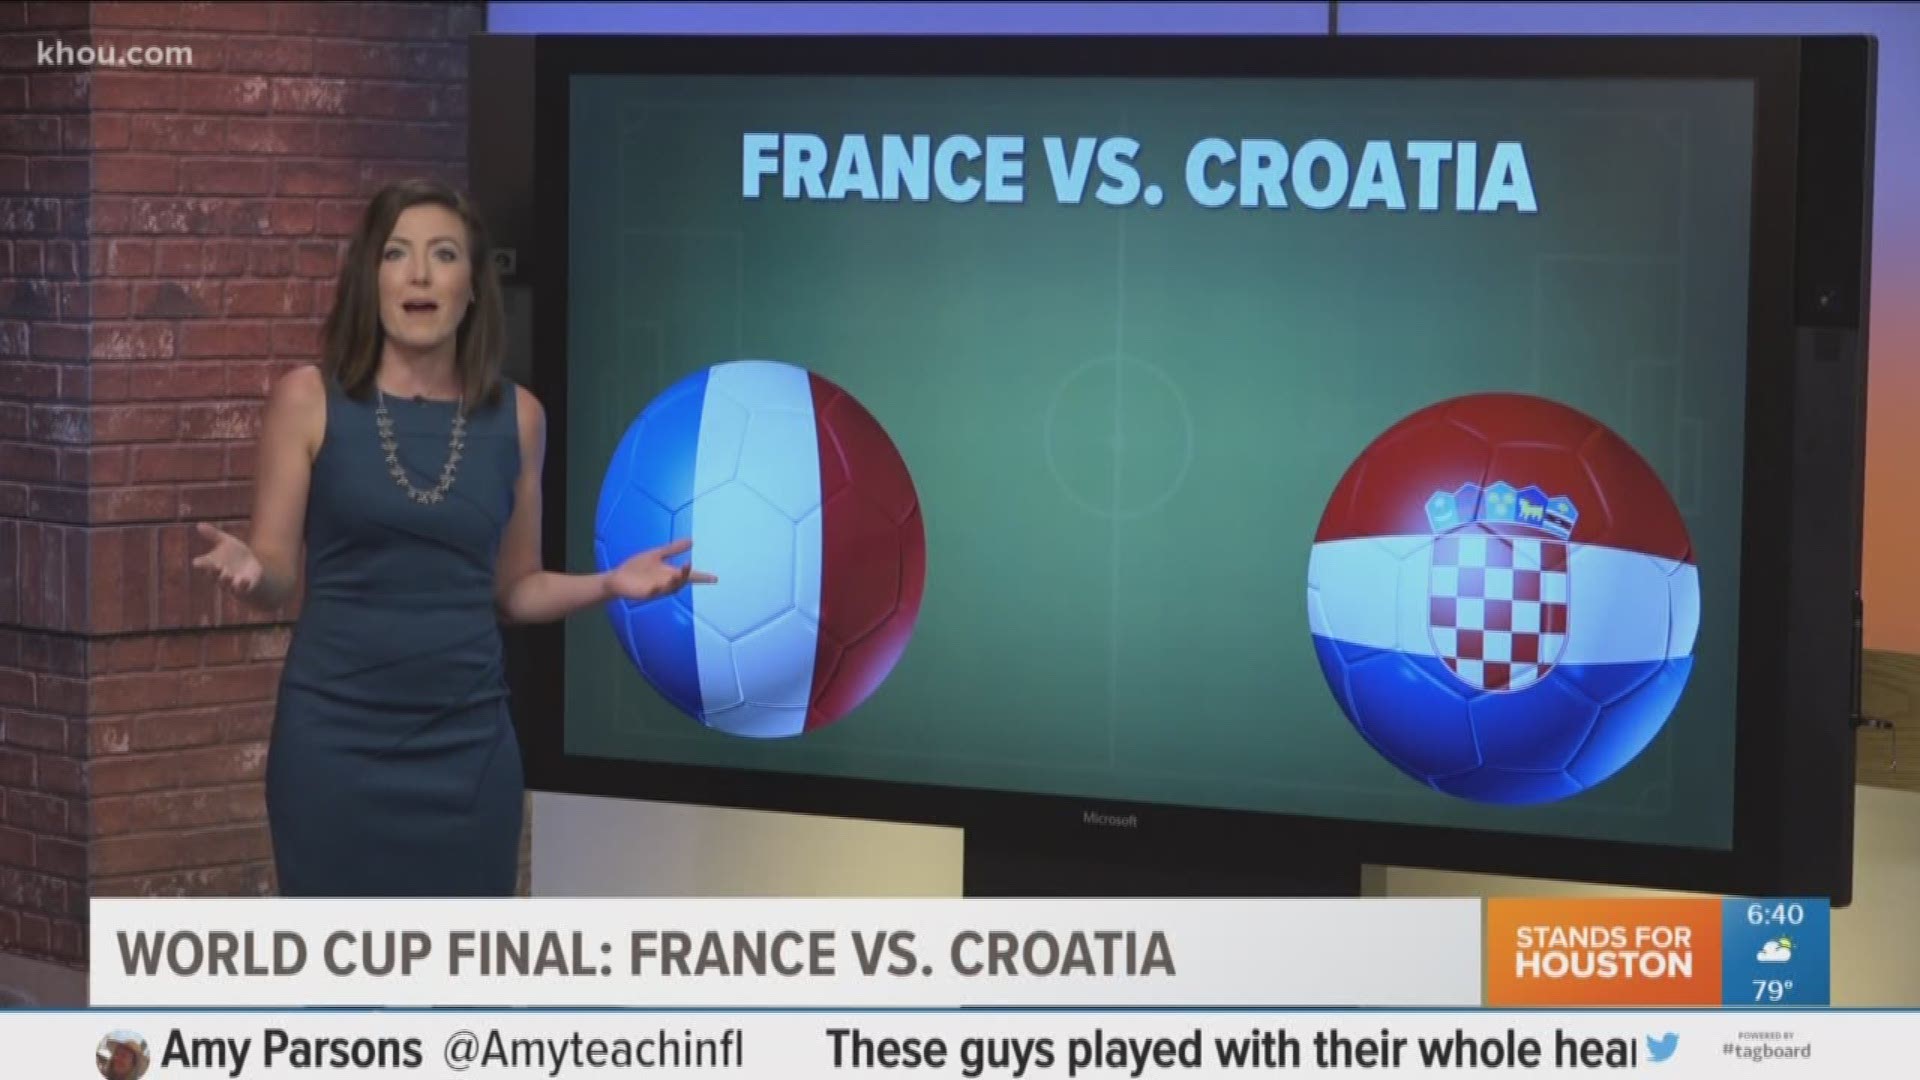 5 things you need to know about World Cup final